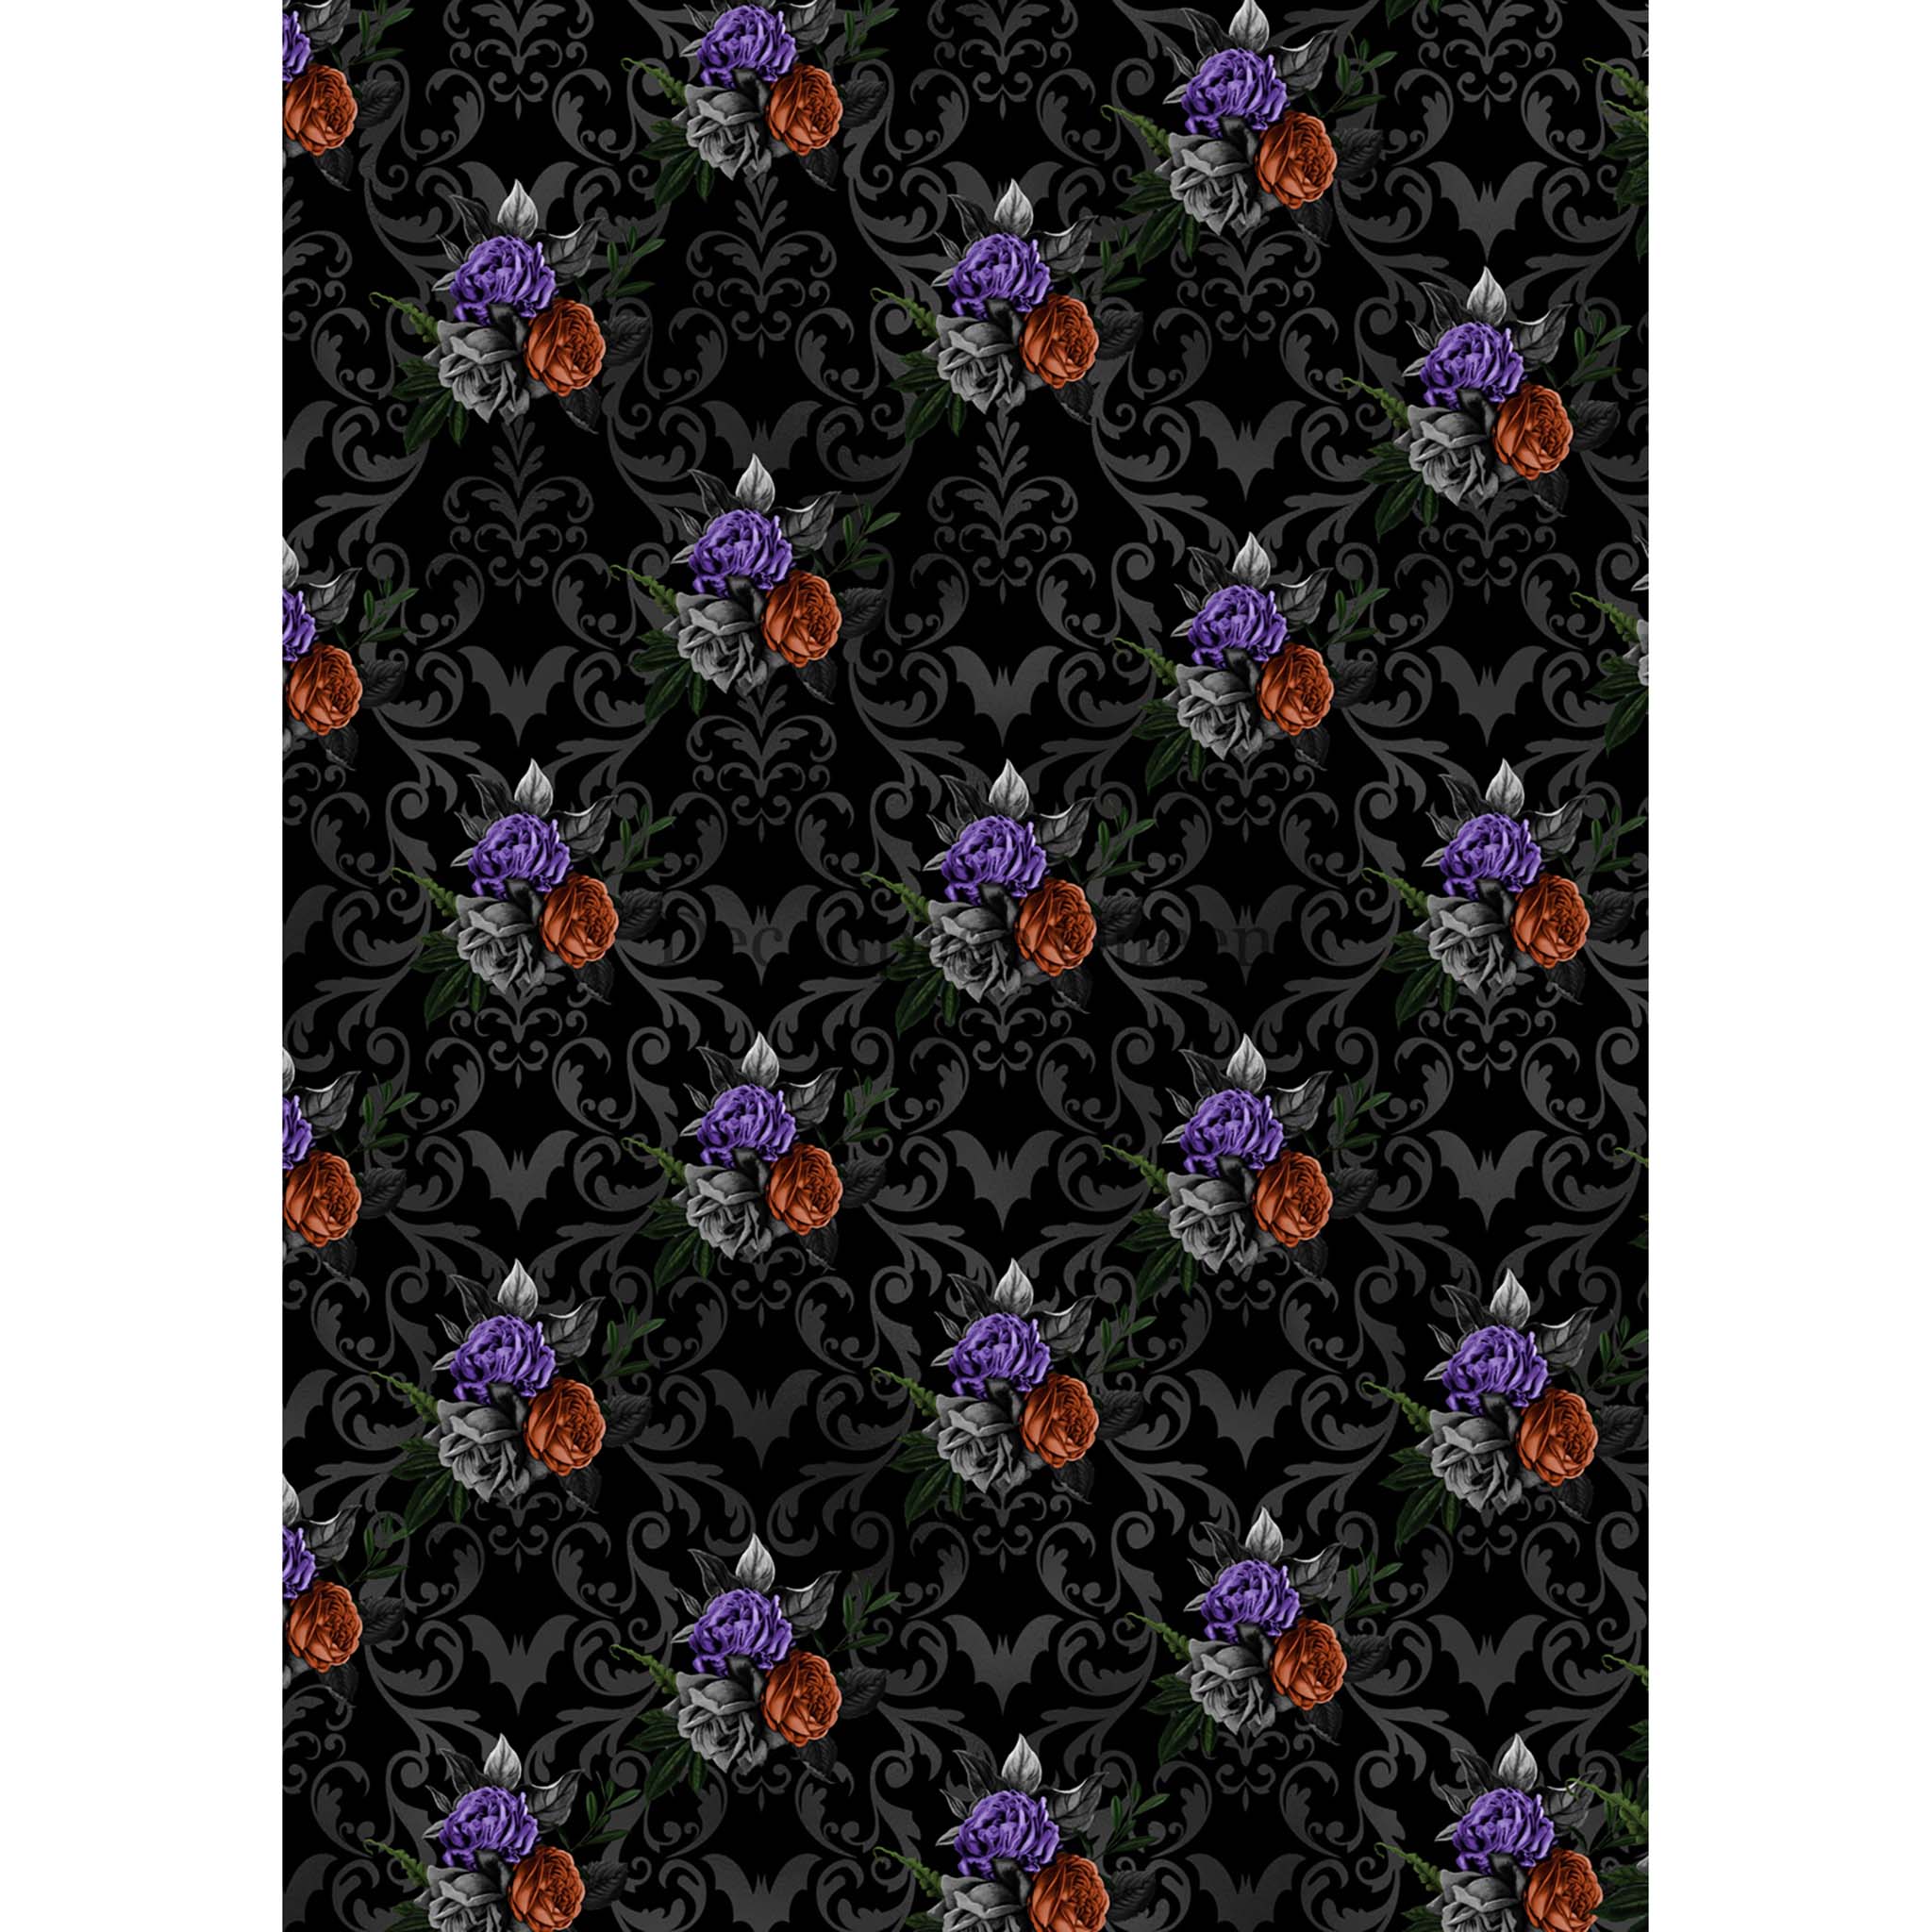 A1 rice paper design that features a dark floral Halloween pattern of bunched grey, purple and red roses surrounded by a grey brocade all against a black background. White borders are on the sides.